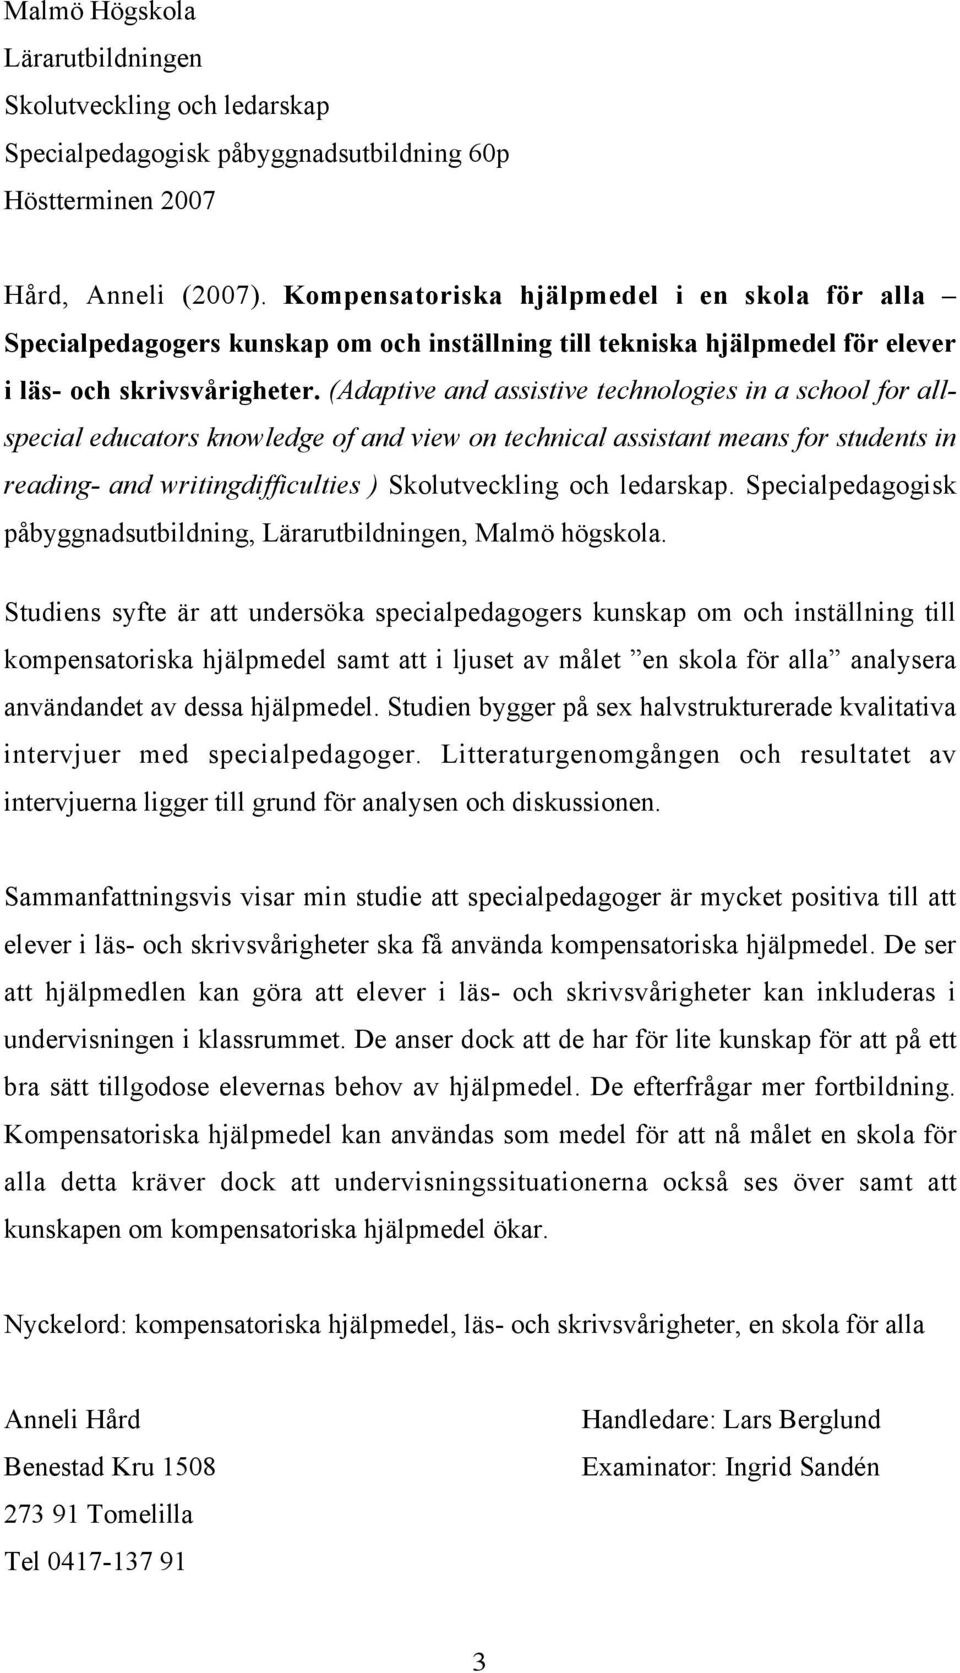 (Adaptive and assistive technologies in a school for allspecial educators knowledge of and view on technical assistant means for students in reading- and writingdifficulties ) Skolutveckling och